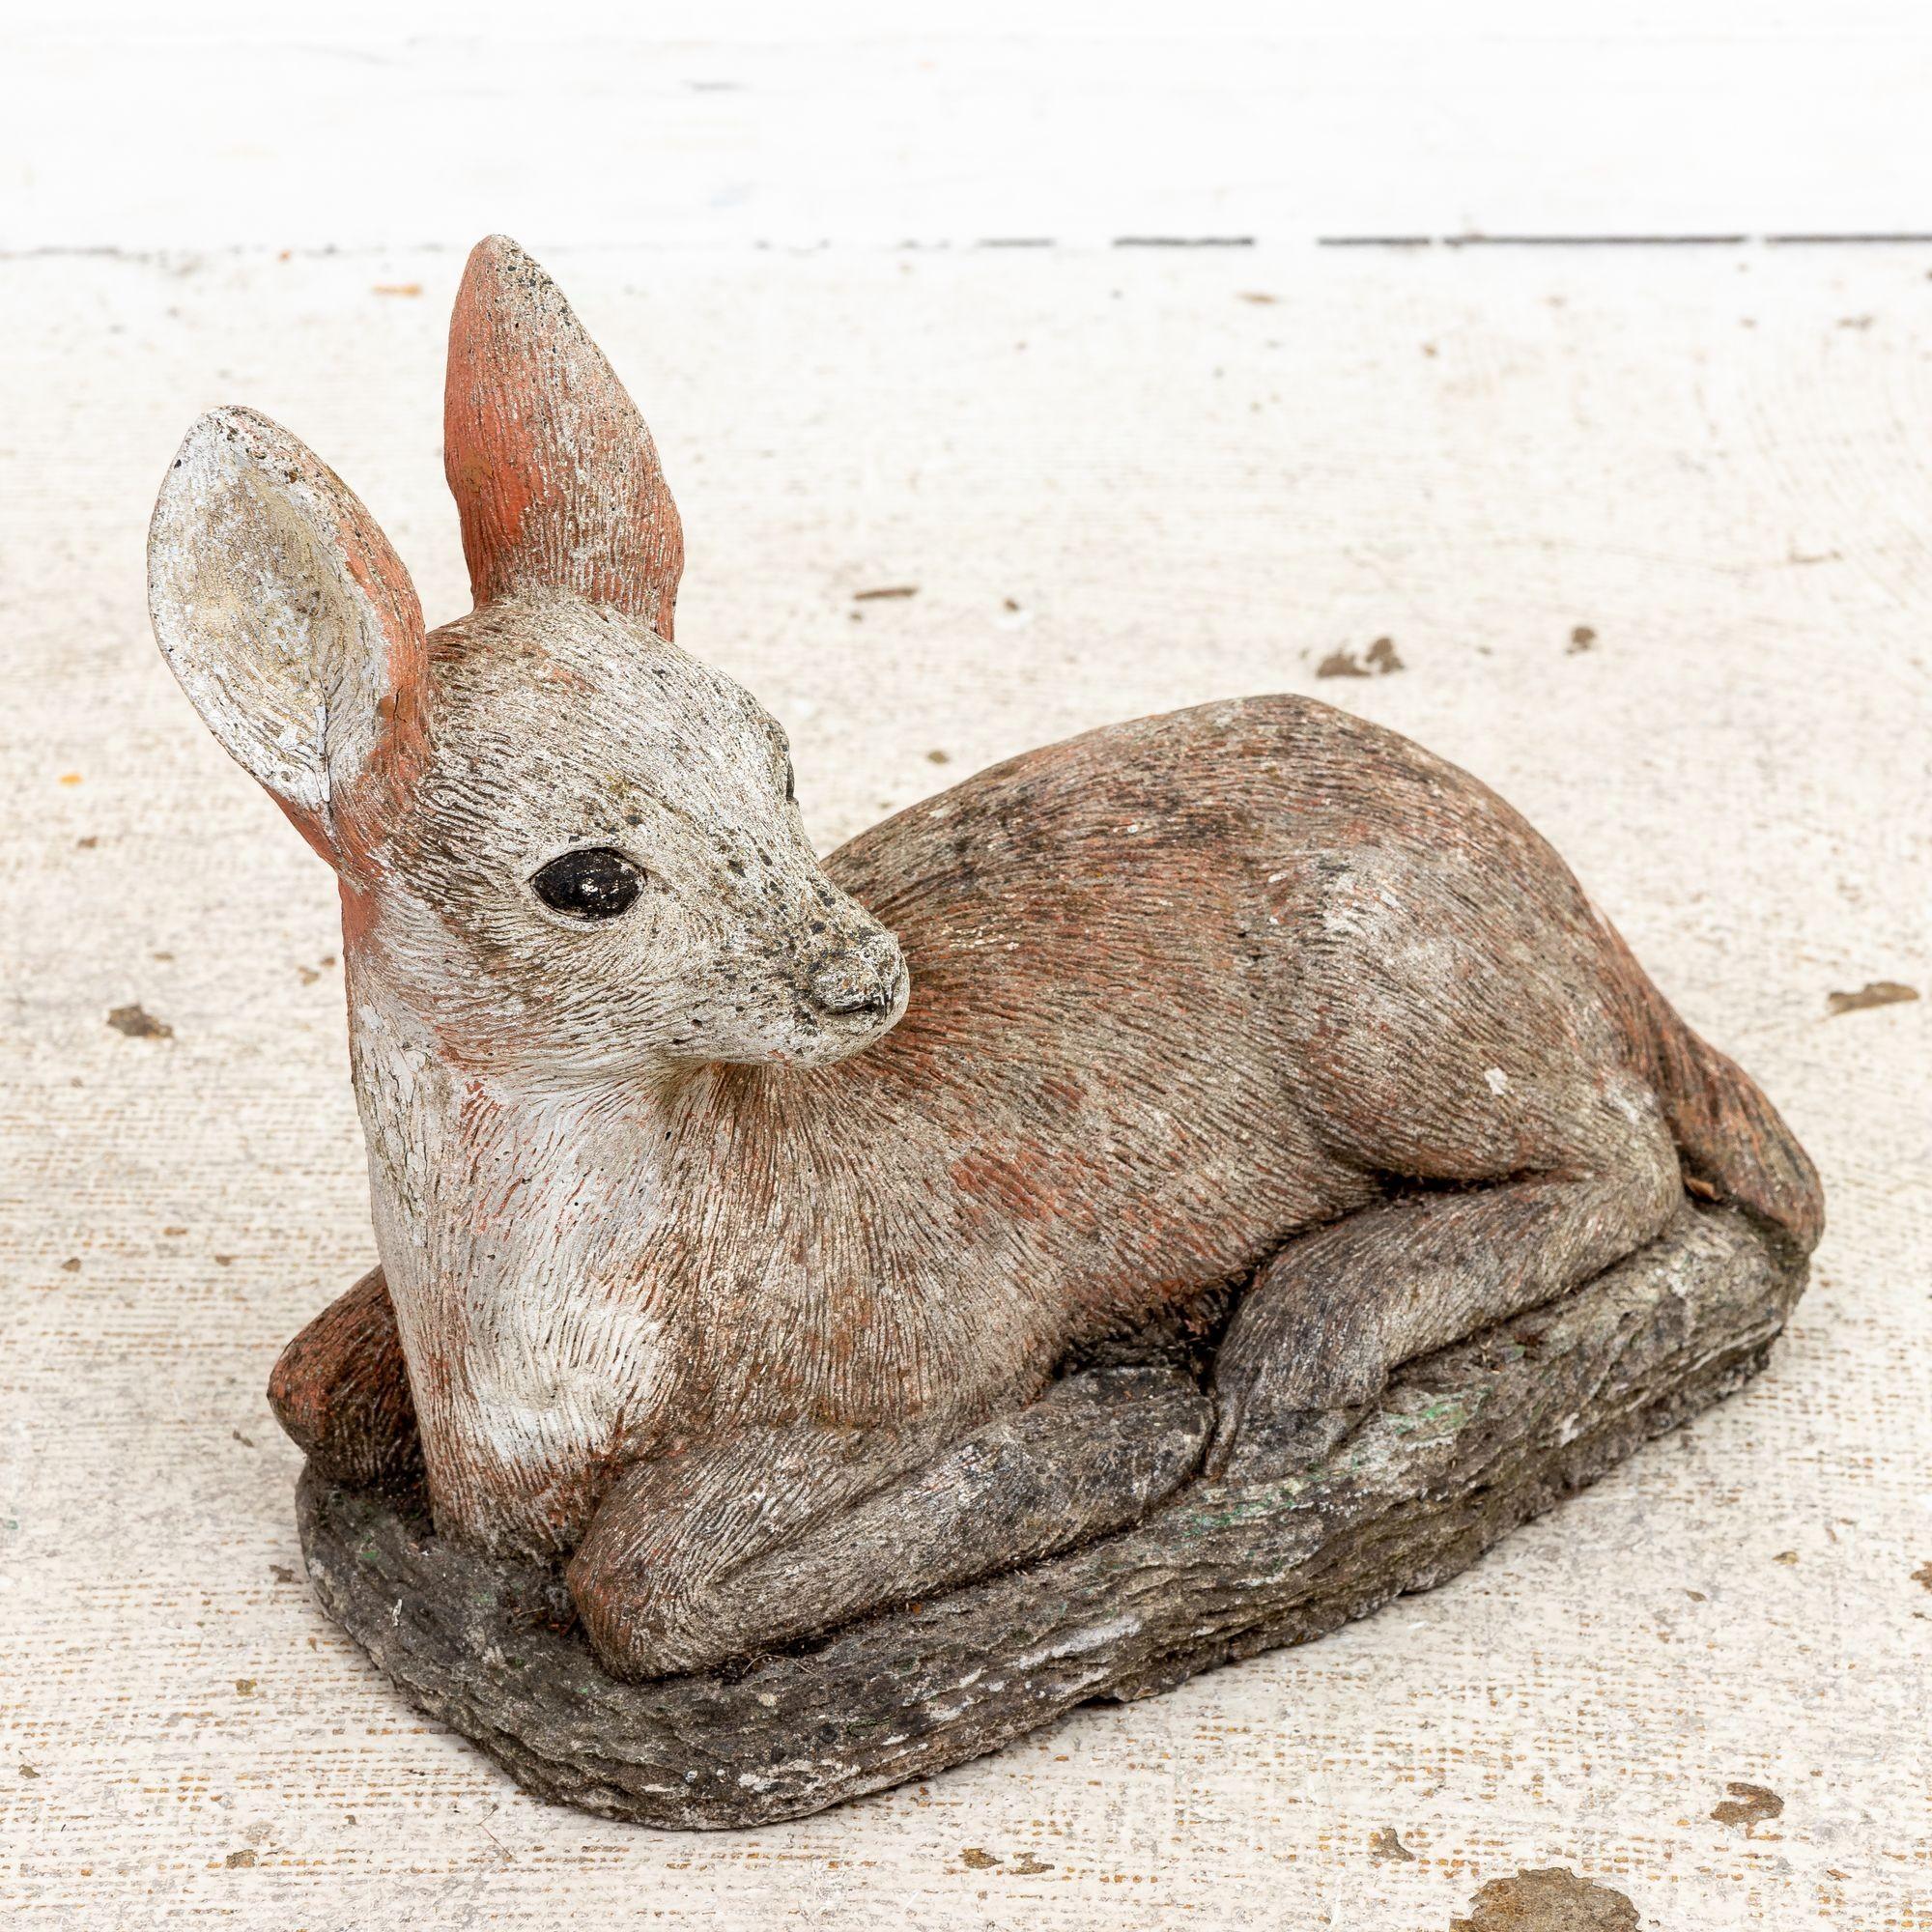 Transport yourself to the enchanting gardens of the mid-20th century with this exquisite French garden ornament in the shape of a doe or deer. Crafted with meticulous attention to detail and recreating a lifelike coat, this captivating sculpture